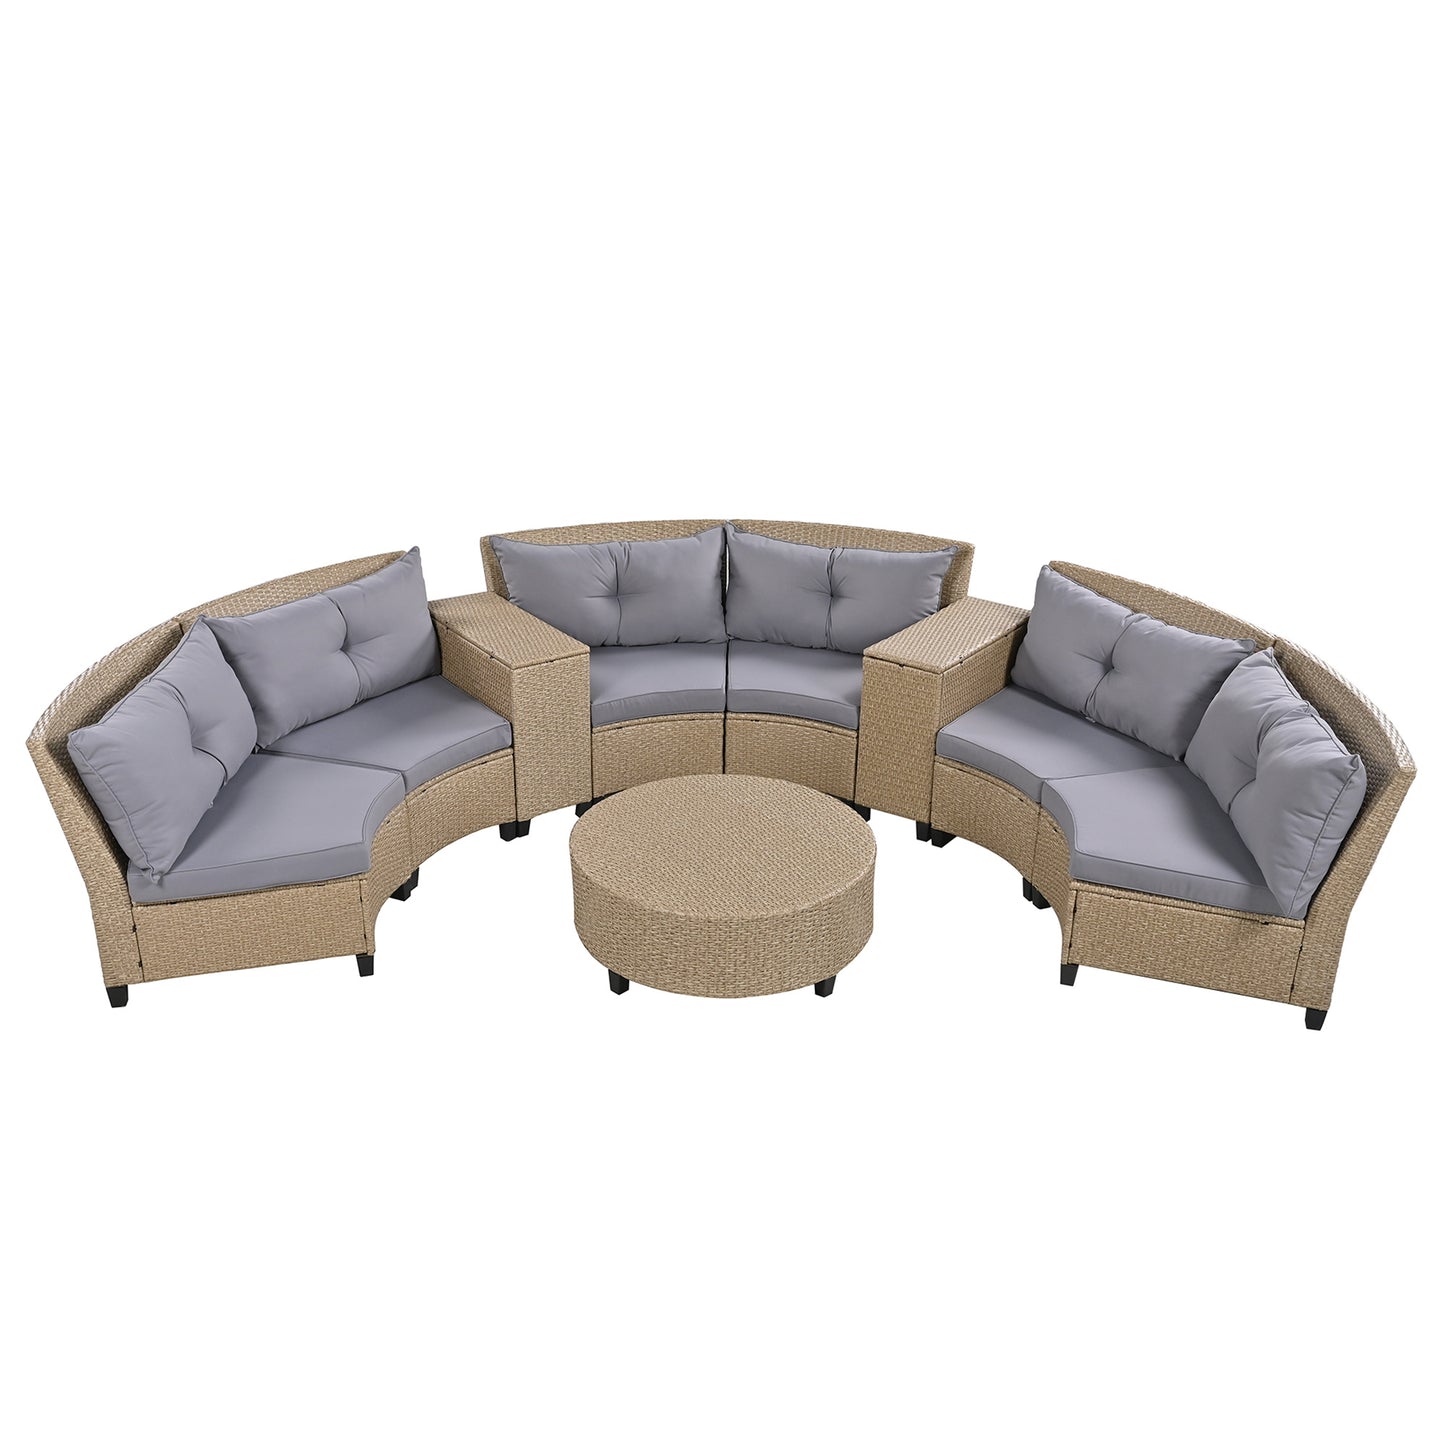 HDPE Rattan 6-Person Fan-shaped Suit with Cushions and Table